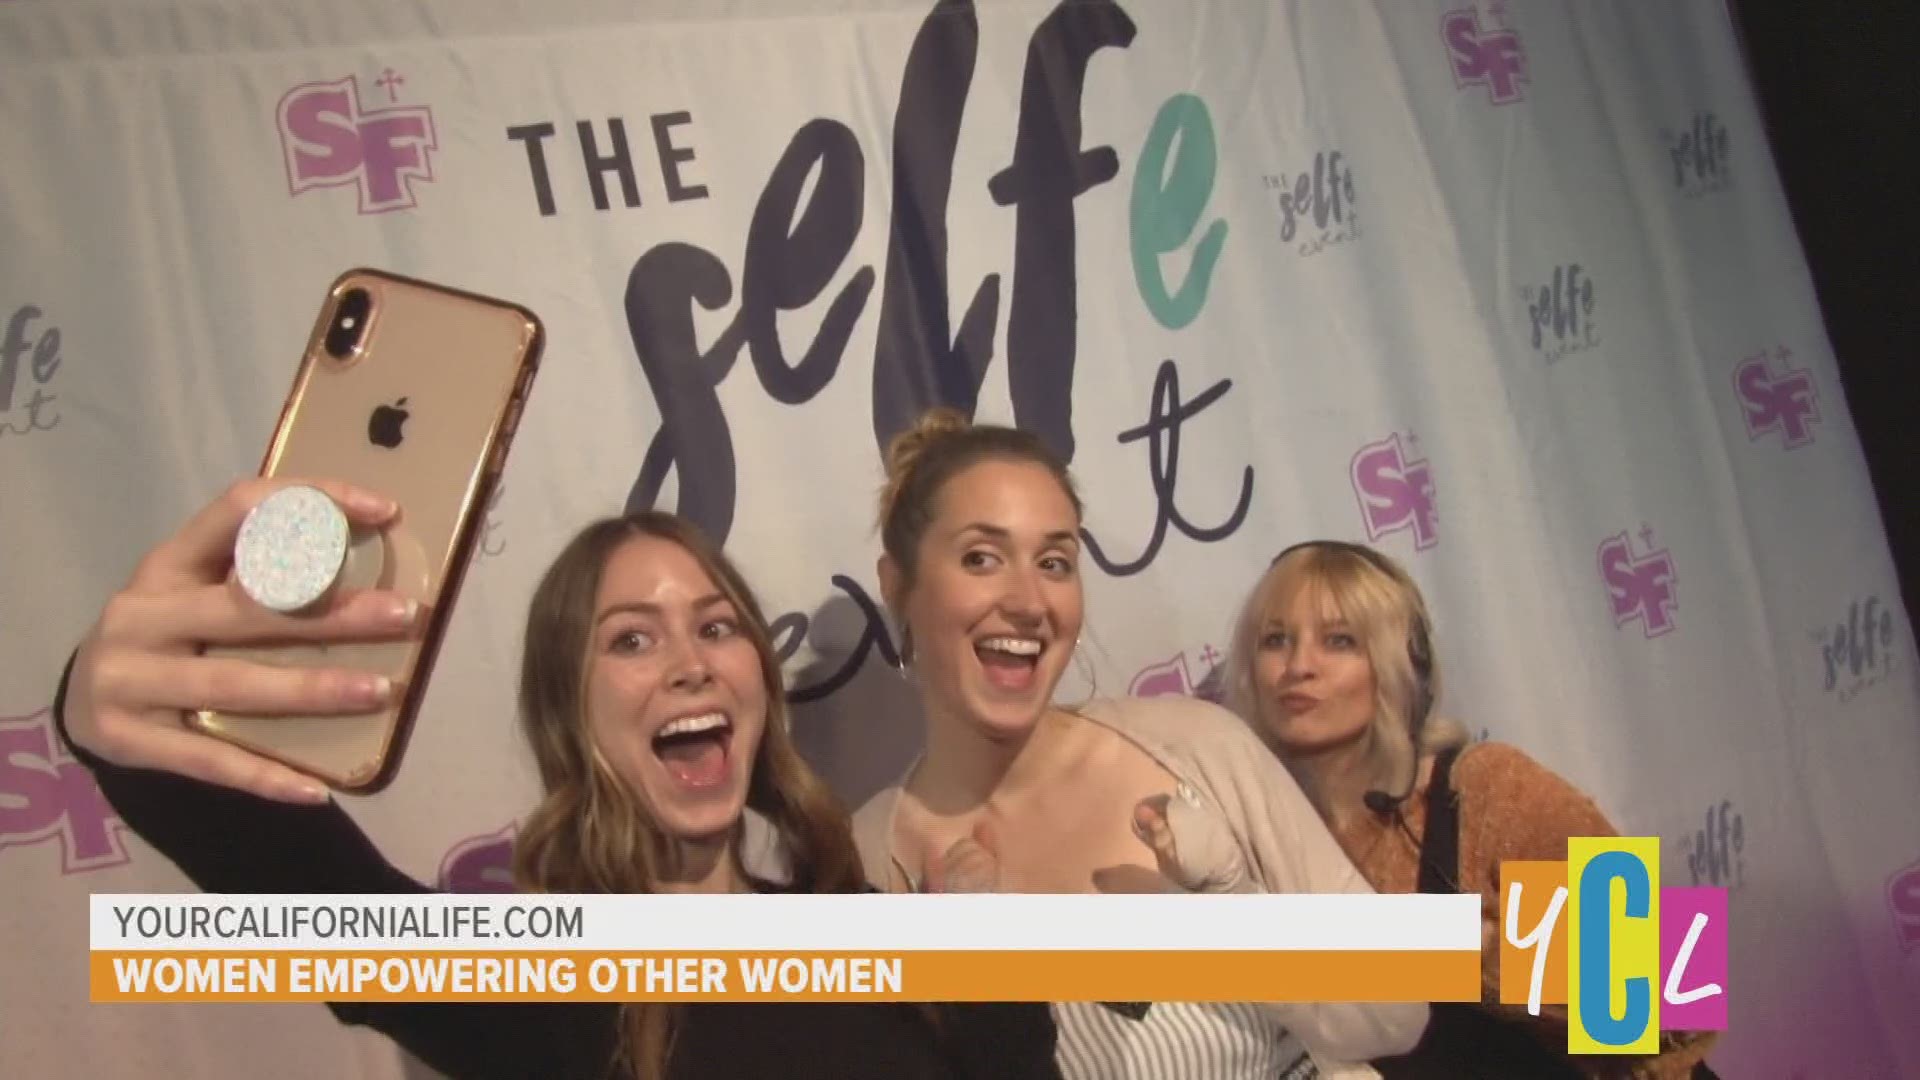 Learn how the upcoming SELFe event is helping to empower women.